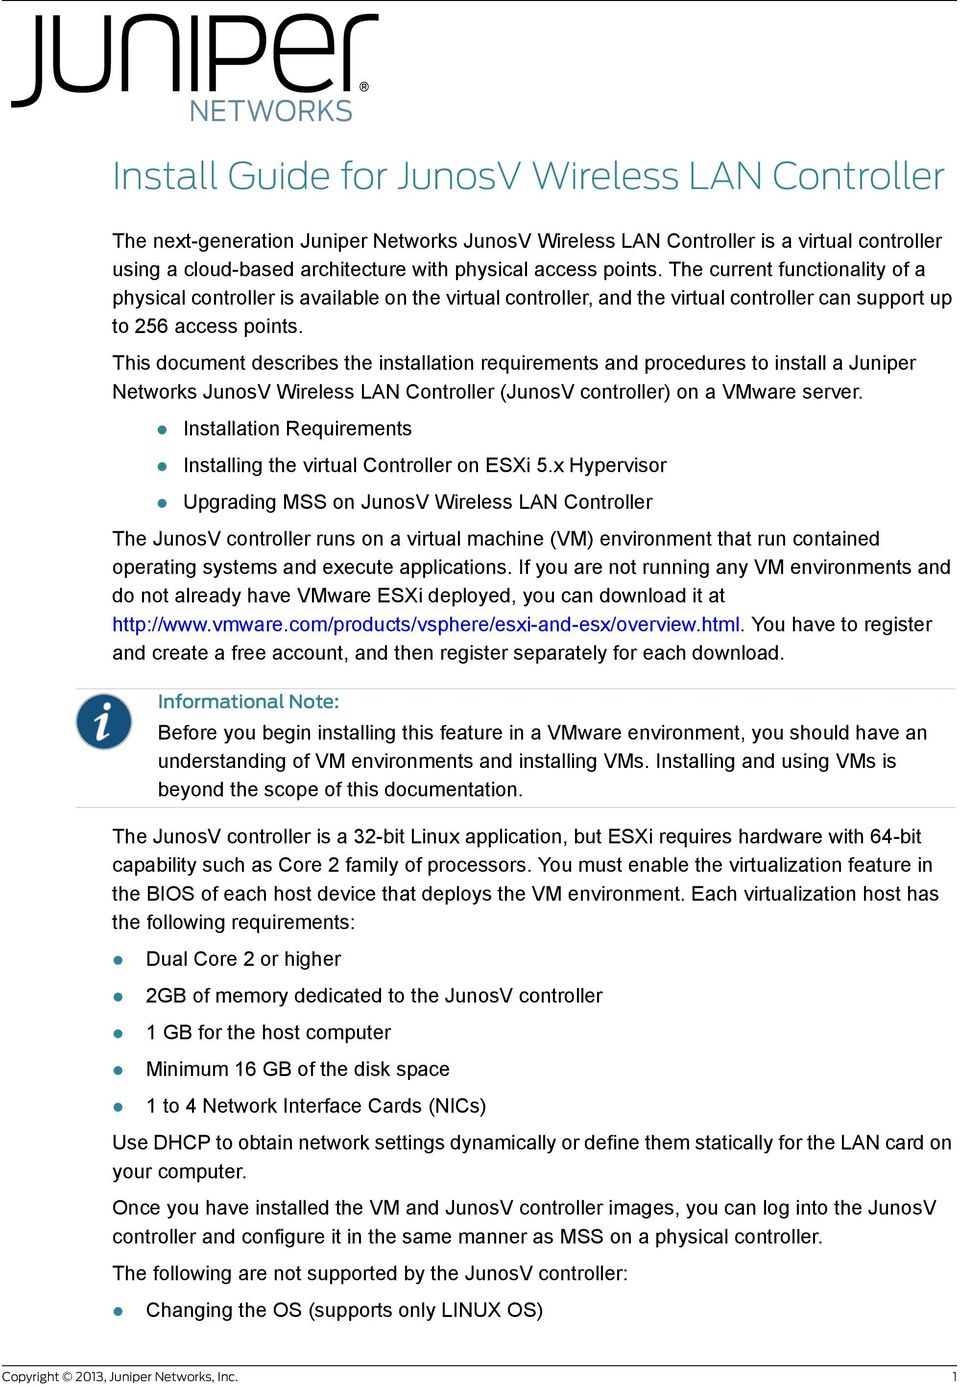 This document describes the installation requirements and procedures to install a Juniper Networks JunosV Wireless LAN Controller (JunosV controller) on a VMware server.